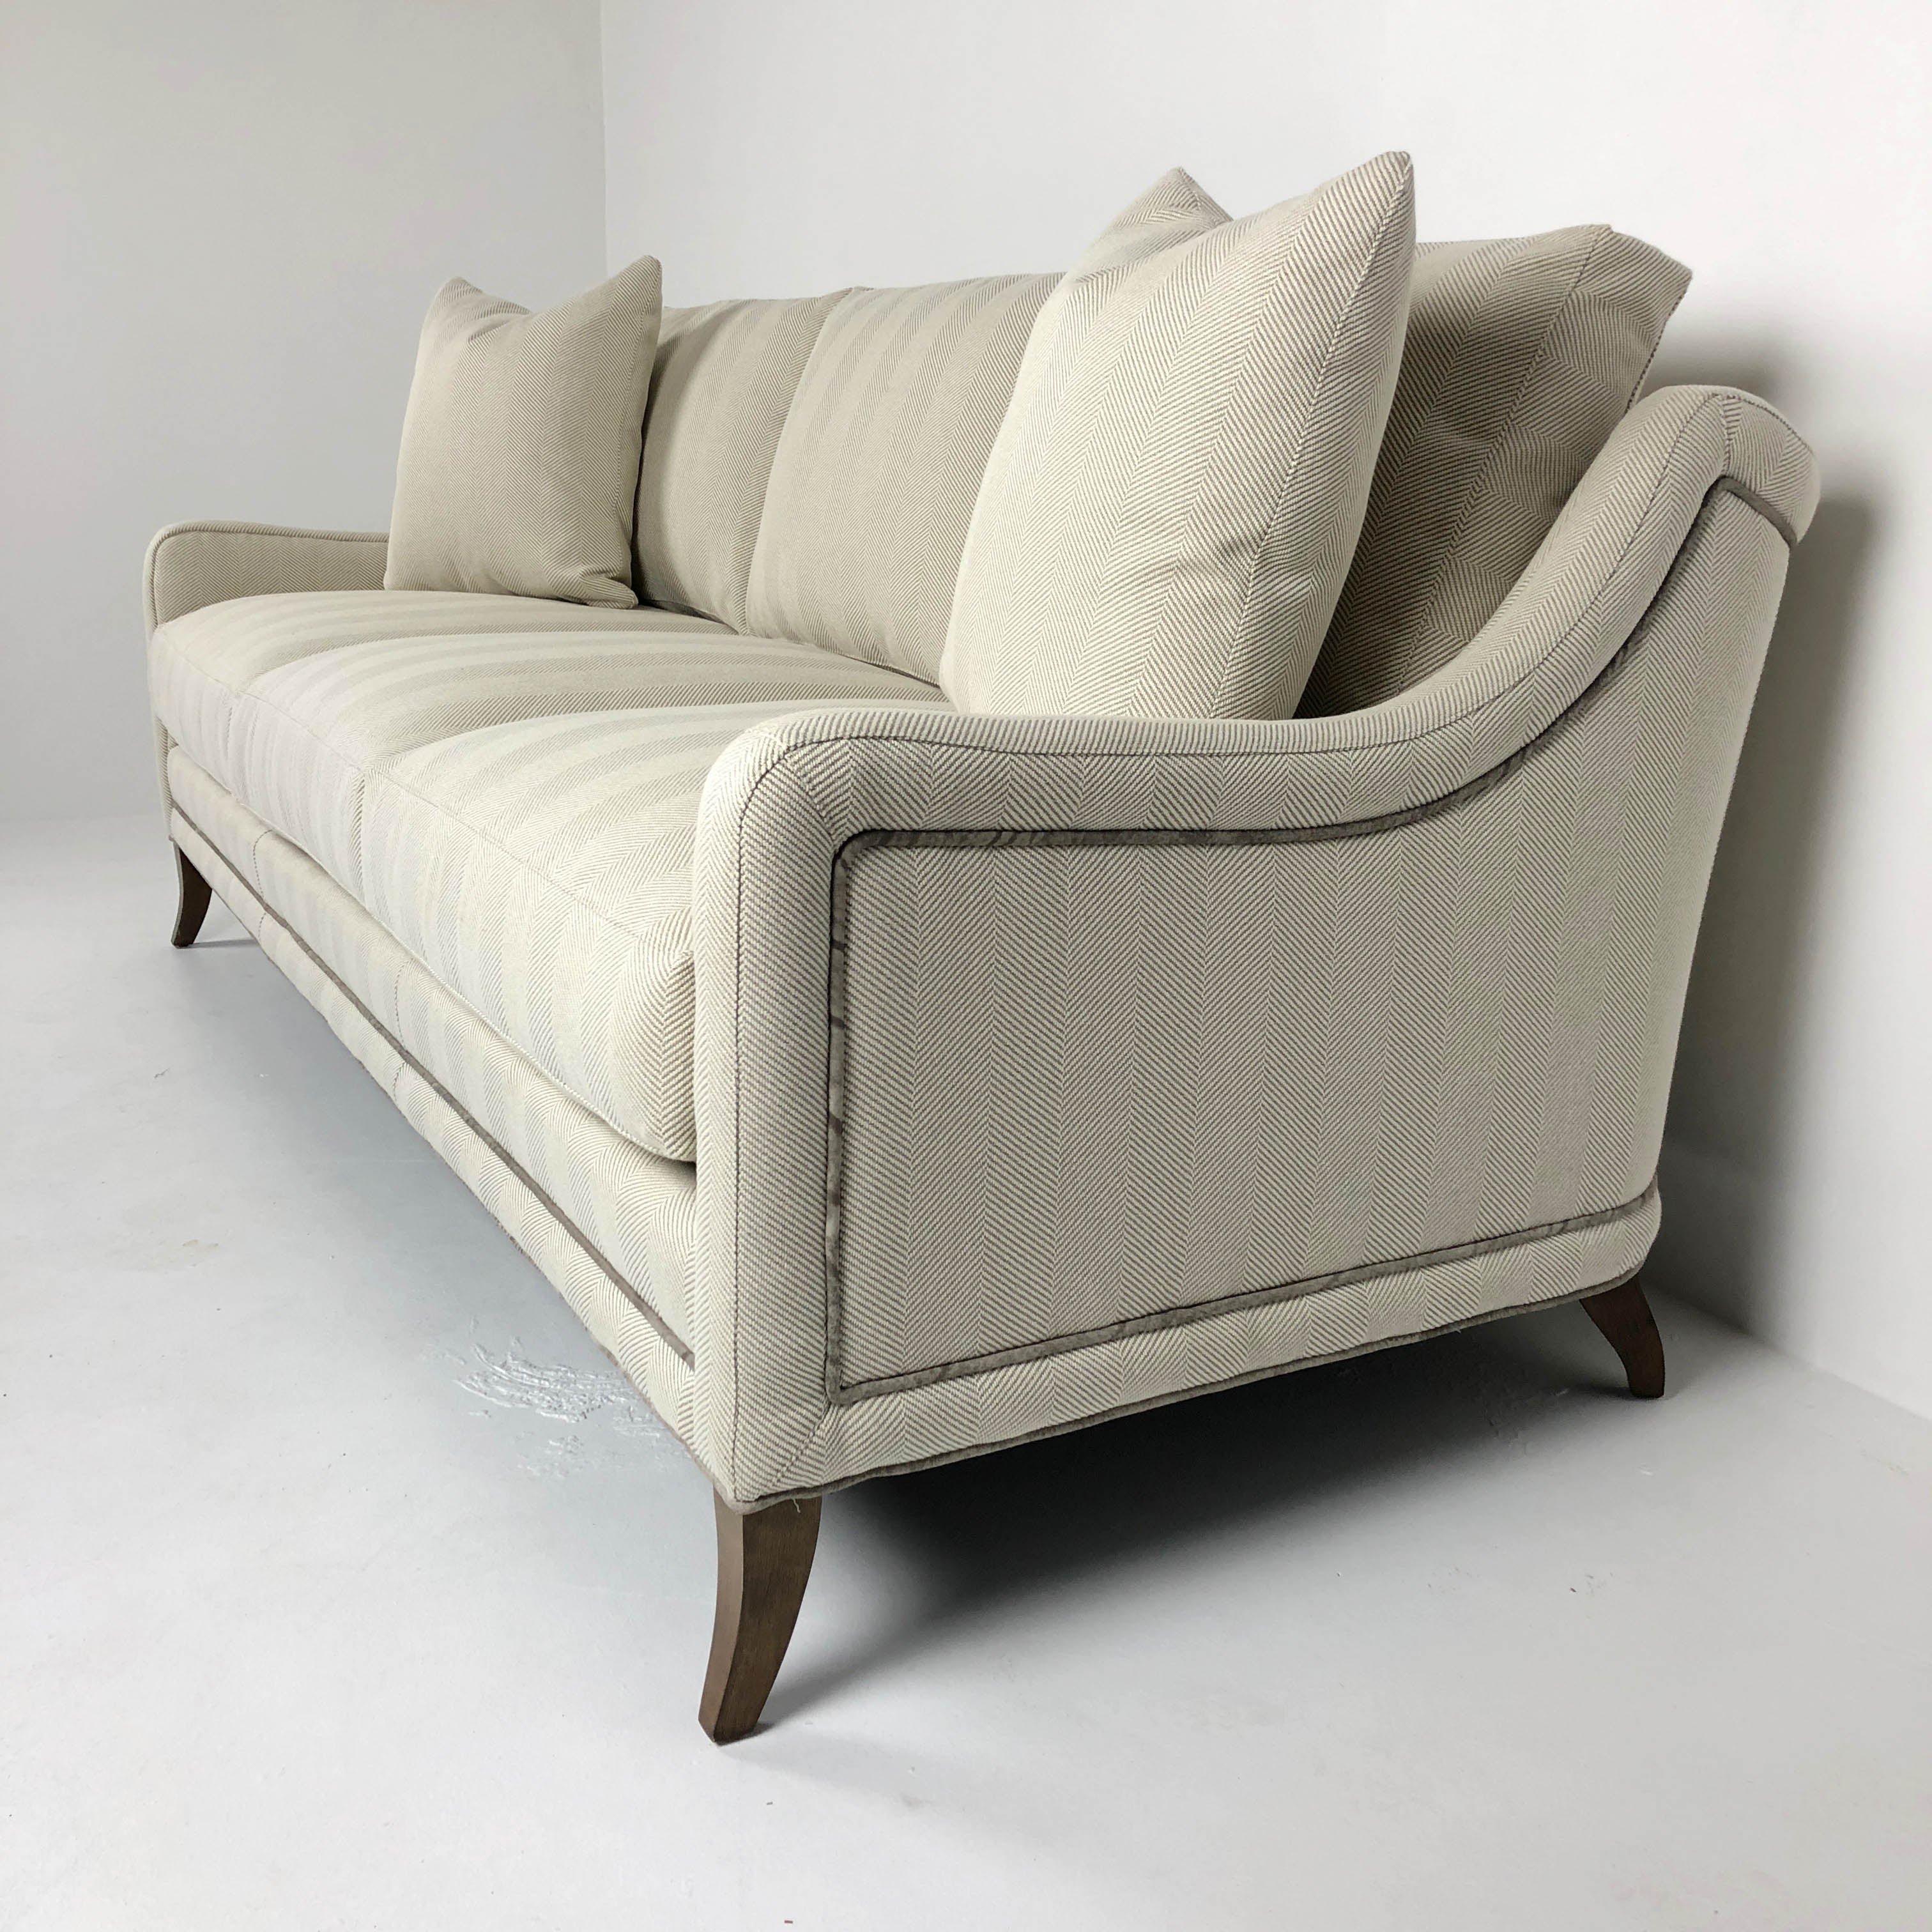 Halsted Sofa in Matix Sterling by Wesley Hall - side view